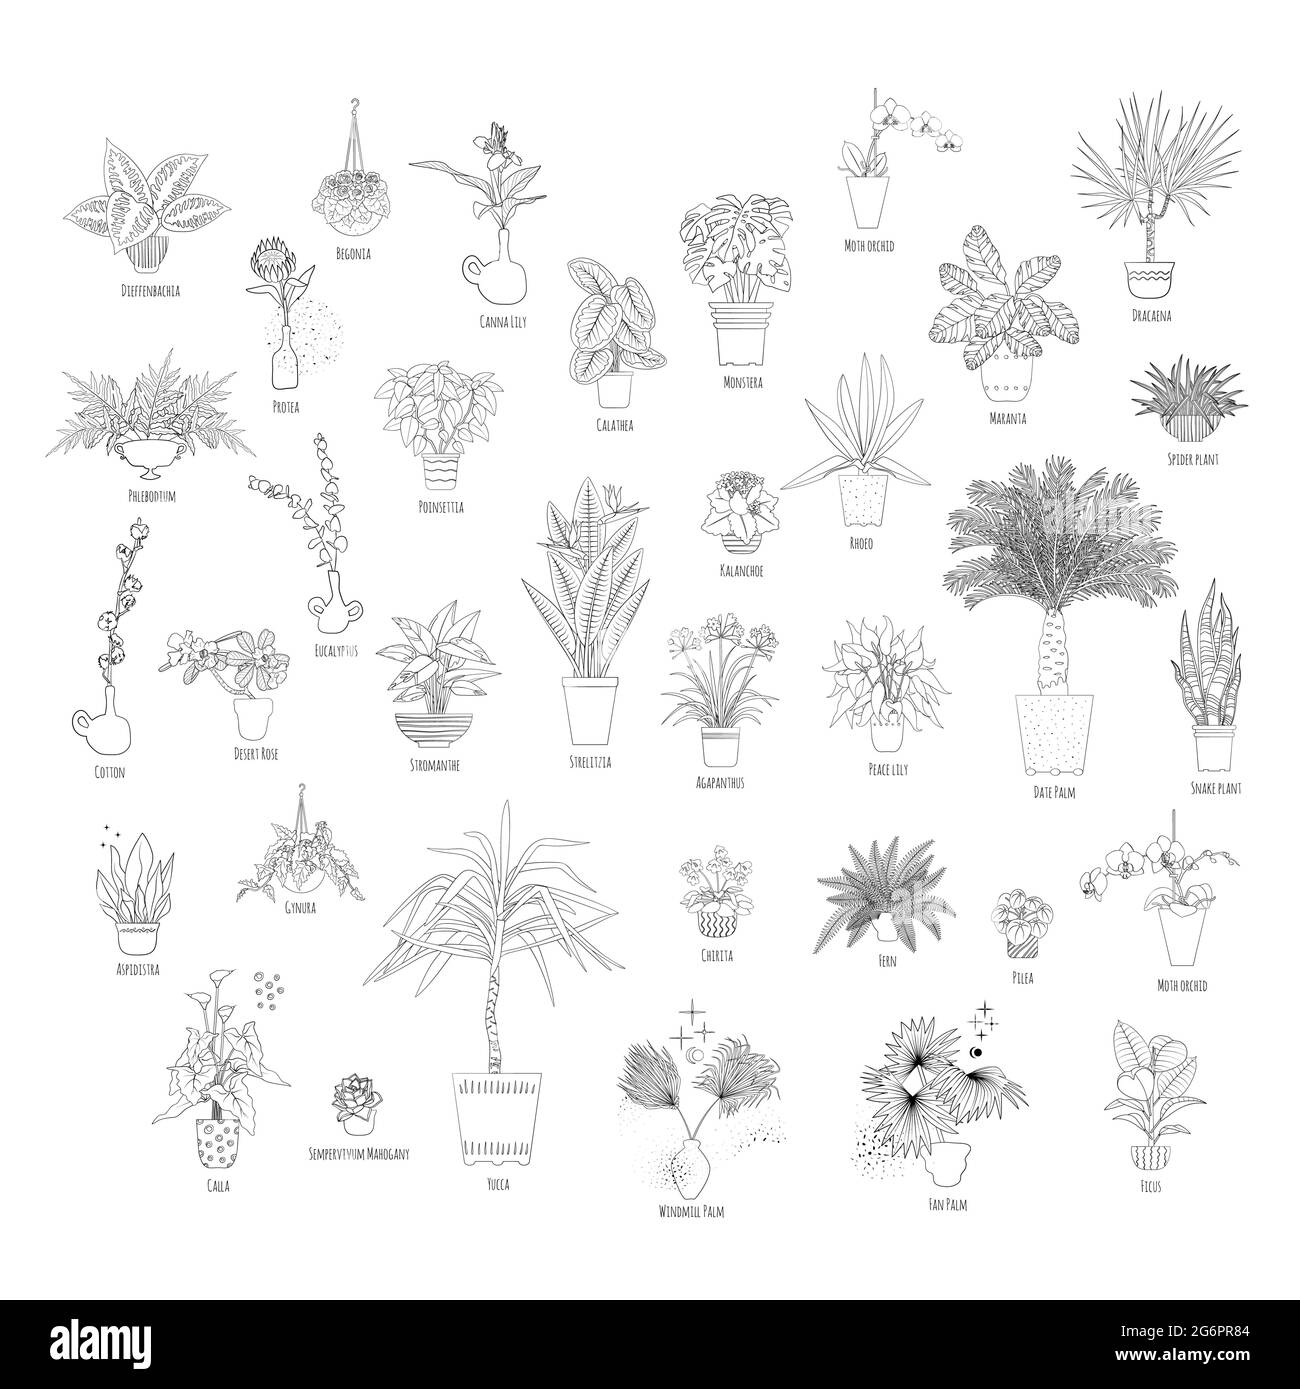 Set of various tropical house plants in planters, with names. Black line art style. Stock Vector